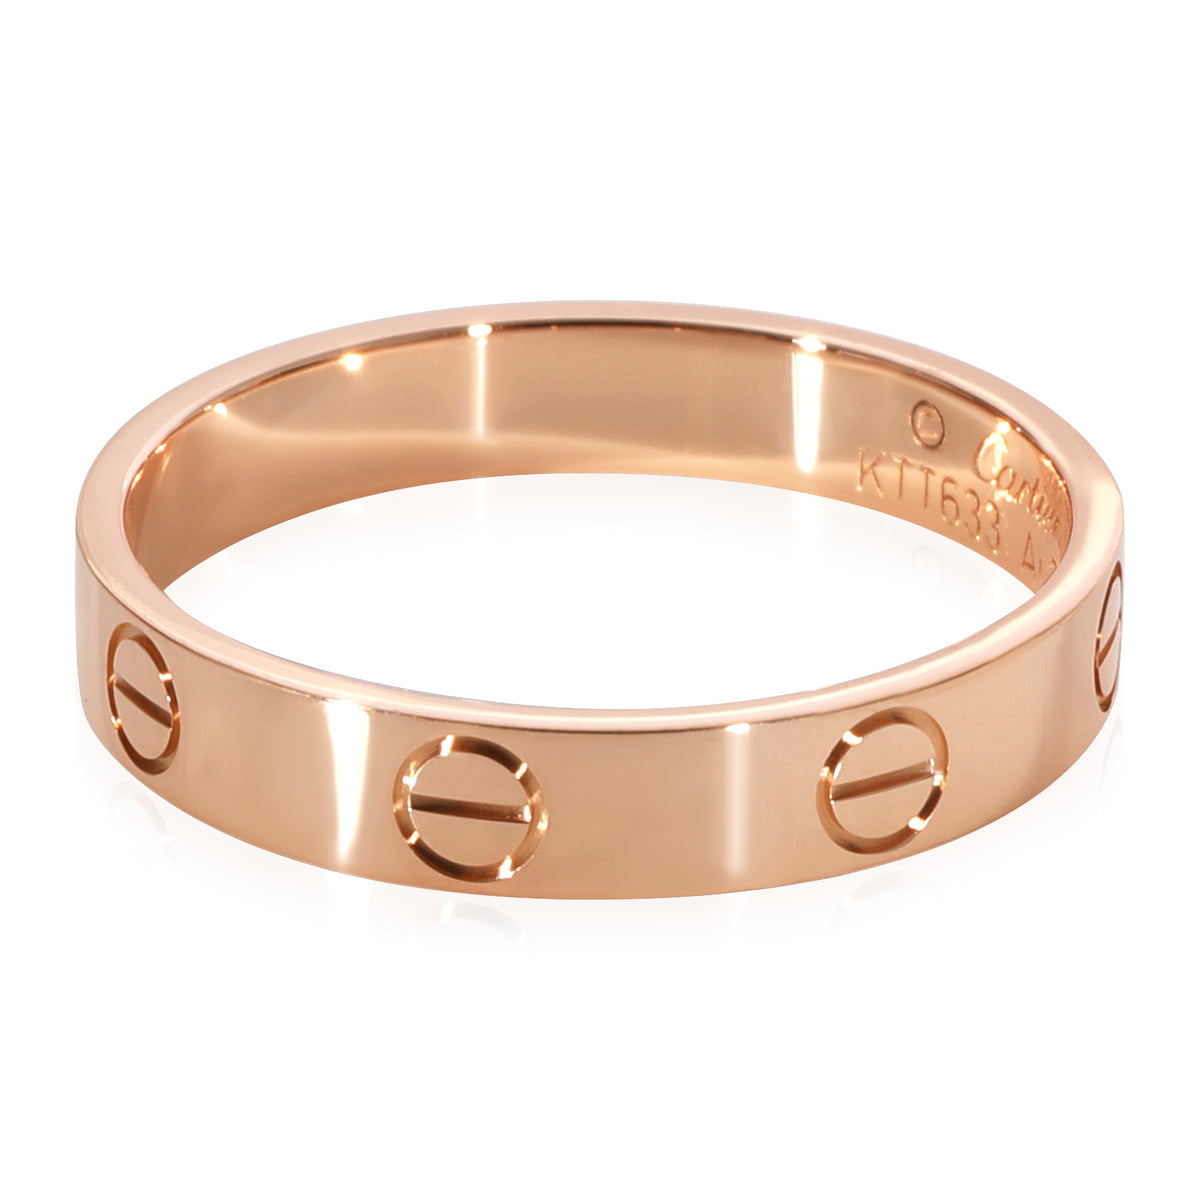 Cartier Love Wedding Band in 18k Rose Gold